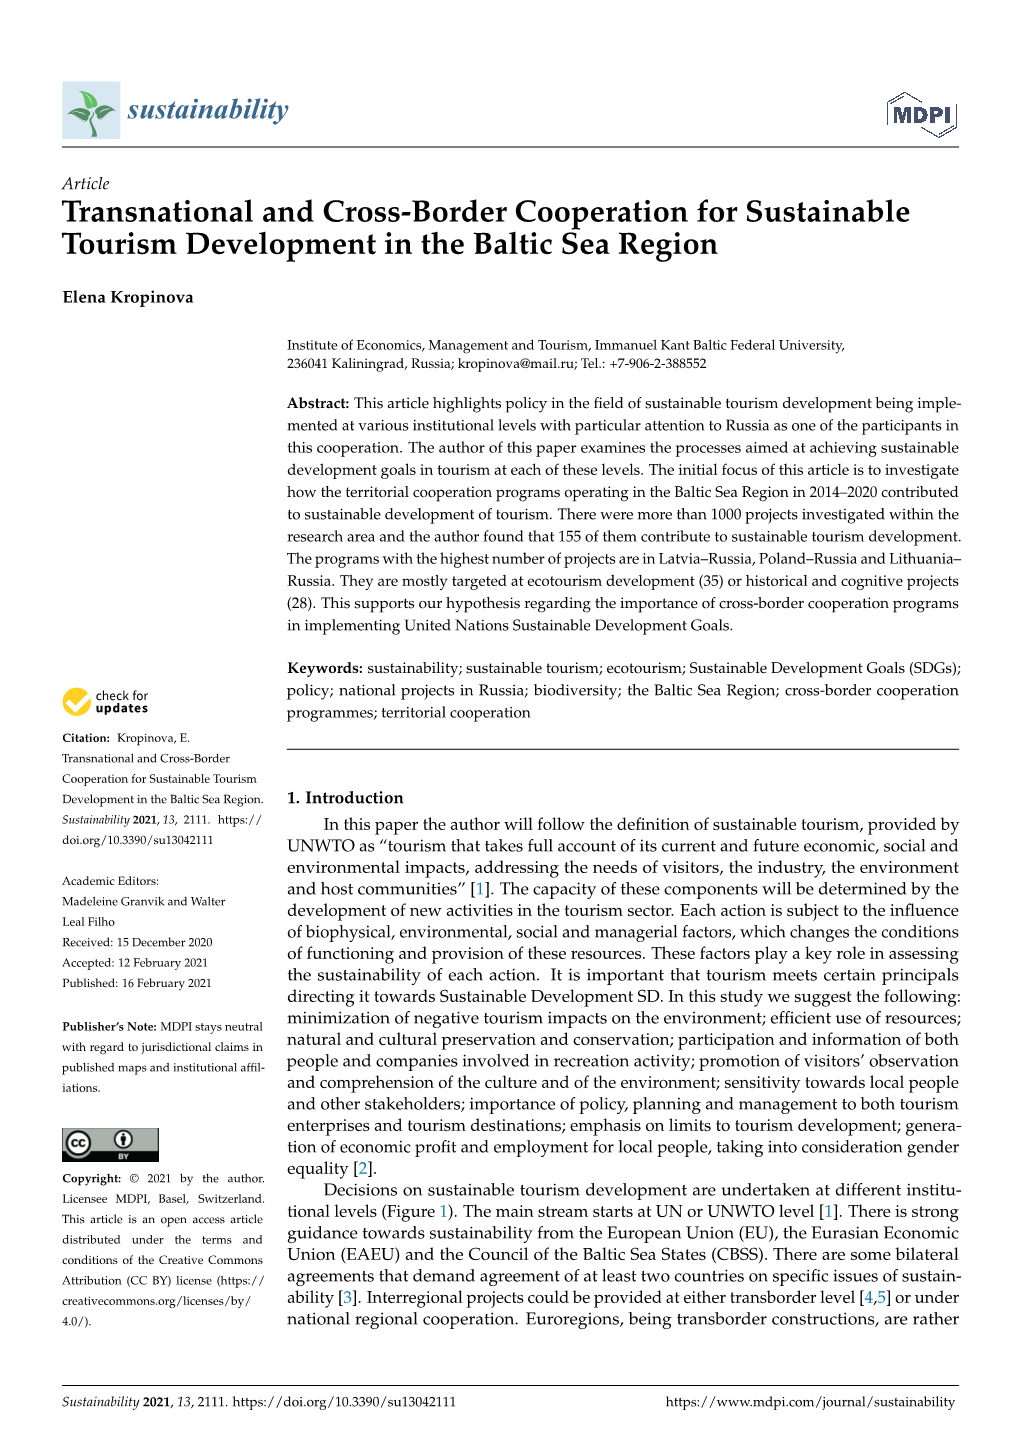 Transnational and Cross-Border Cooperation for Sustainable Tourism Development in the Baltic Sea Region